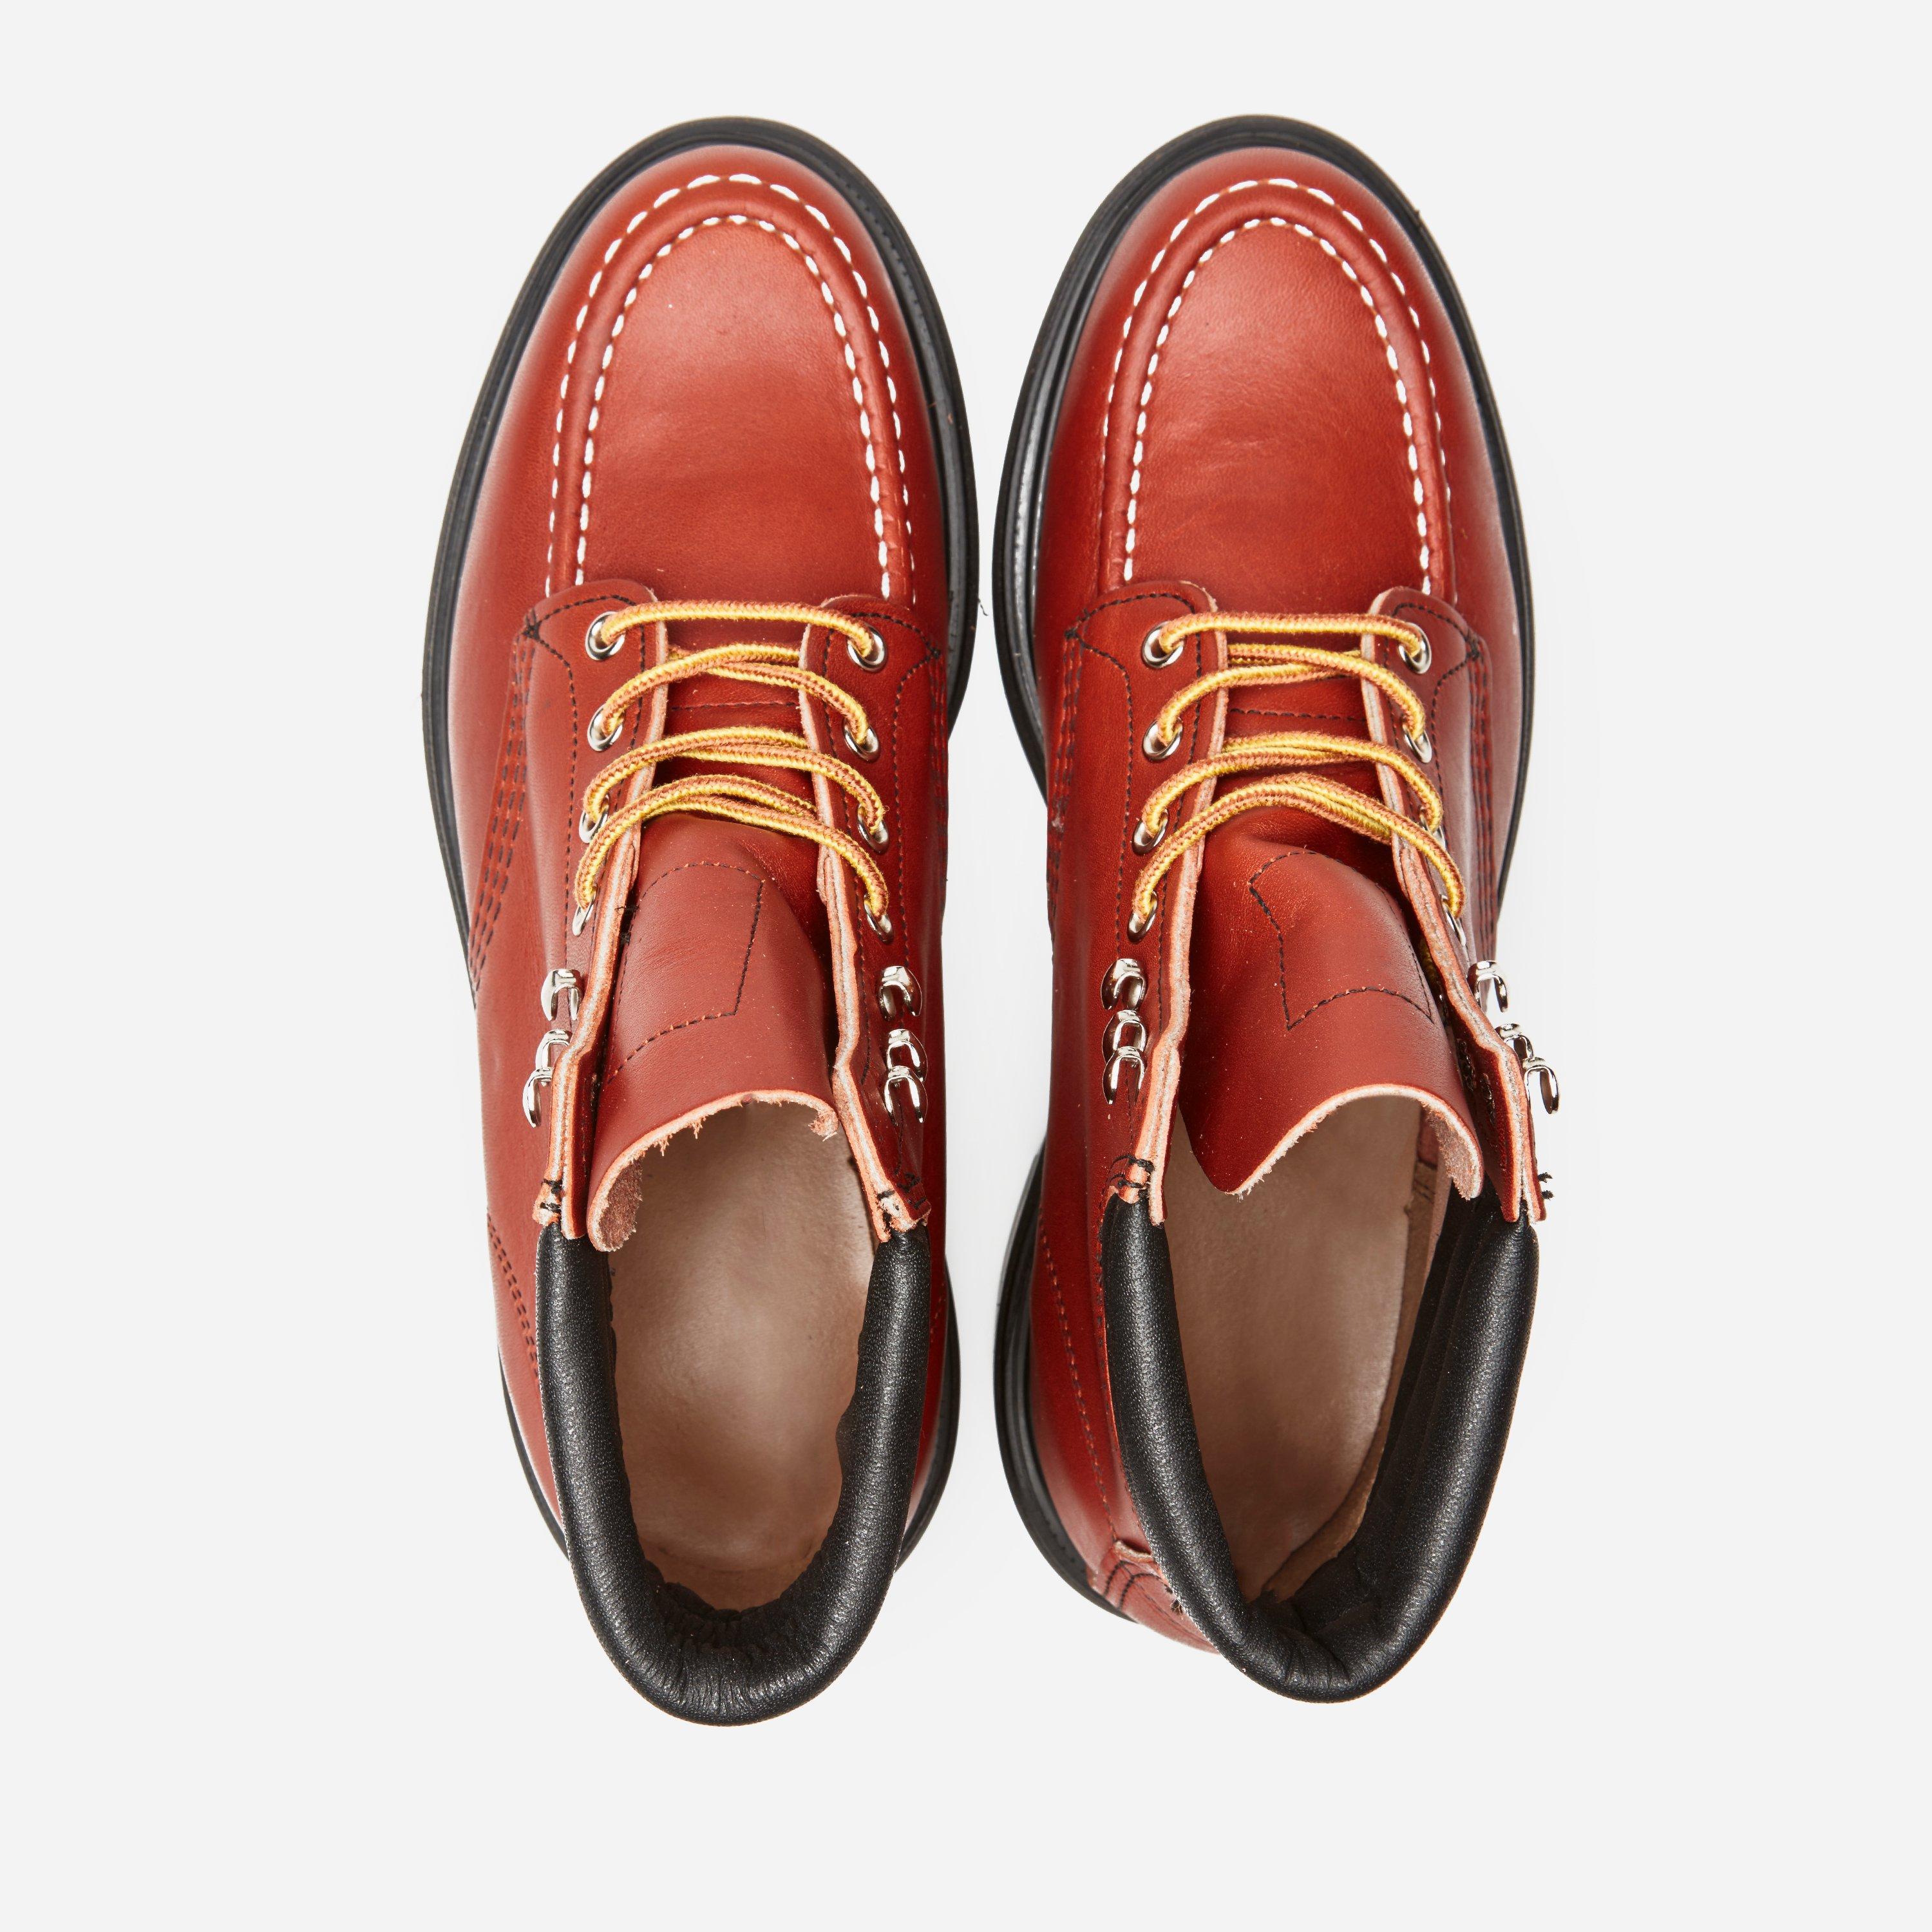 Lyst - Red Wing Classic Moc Supersole Boot in Red for Men